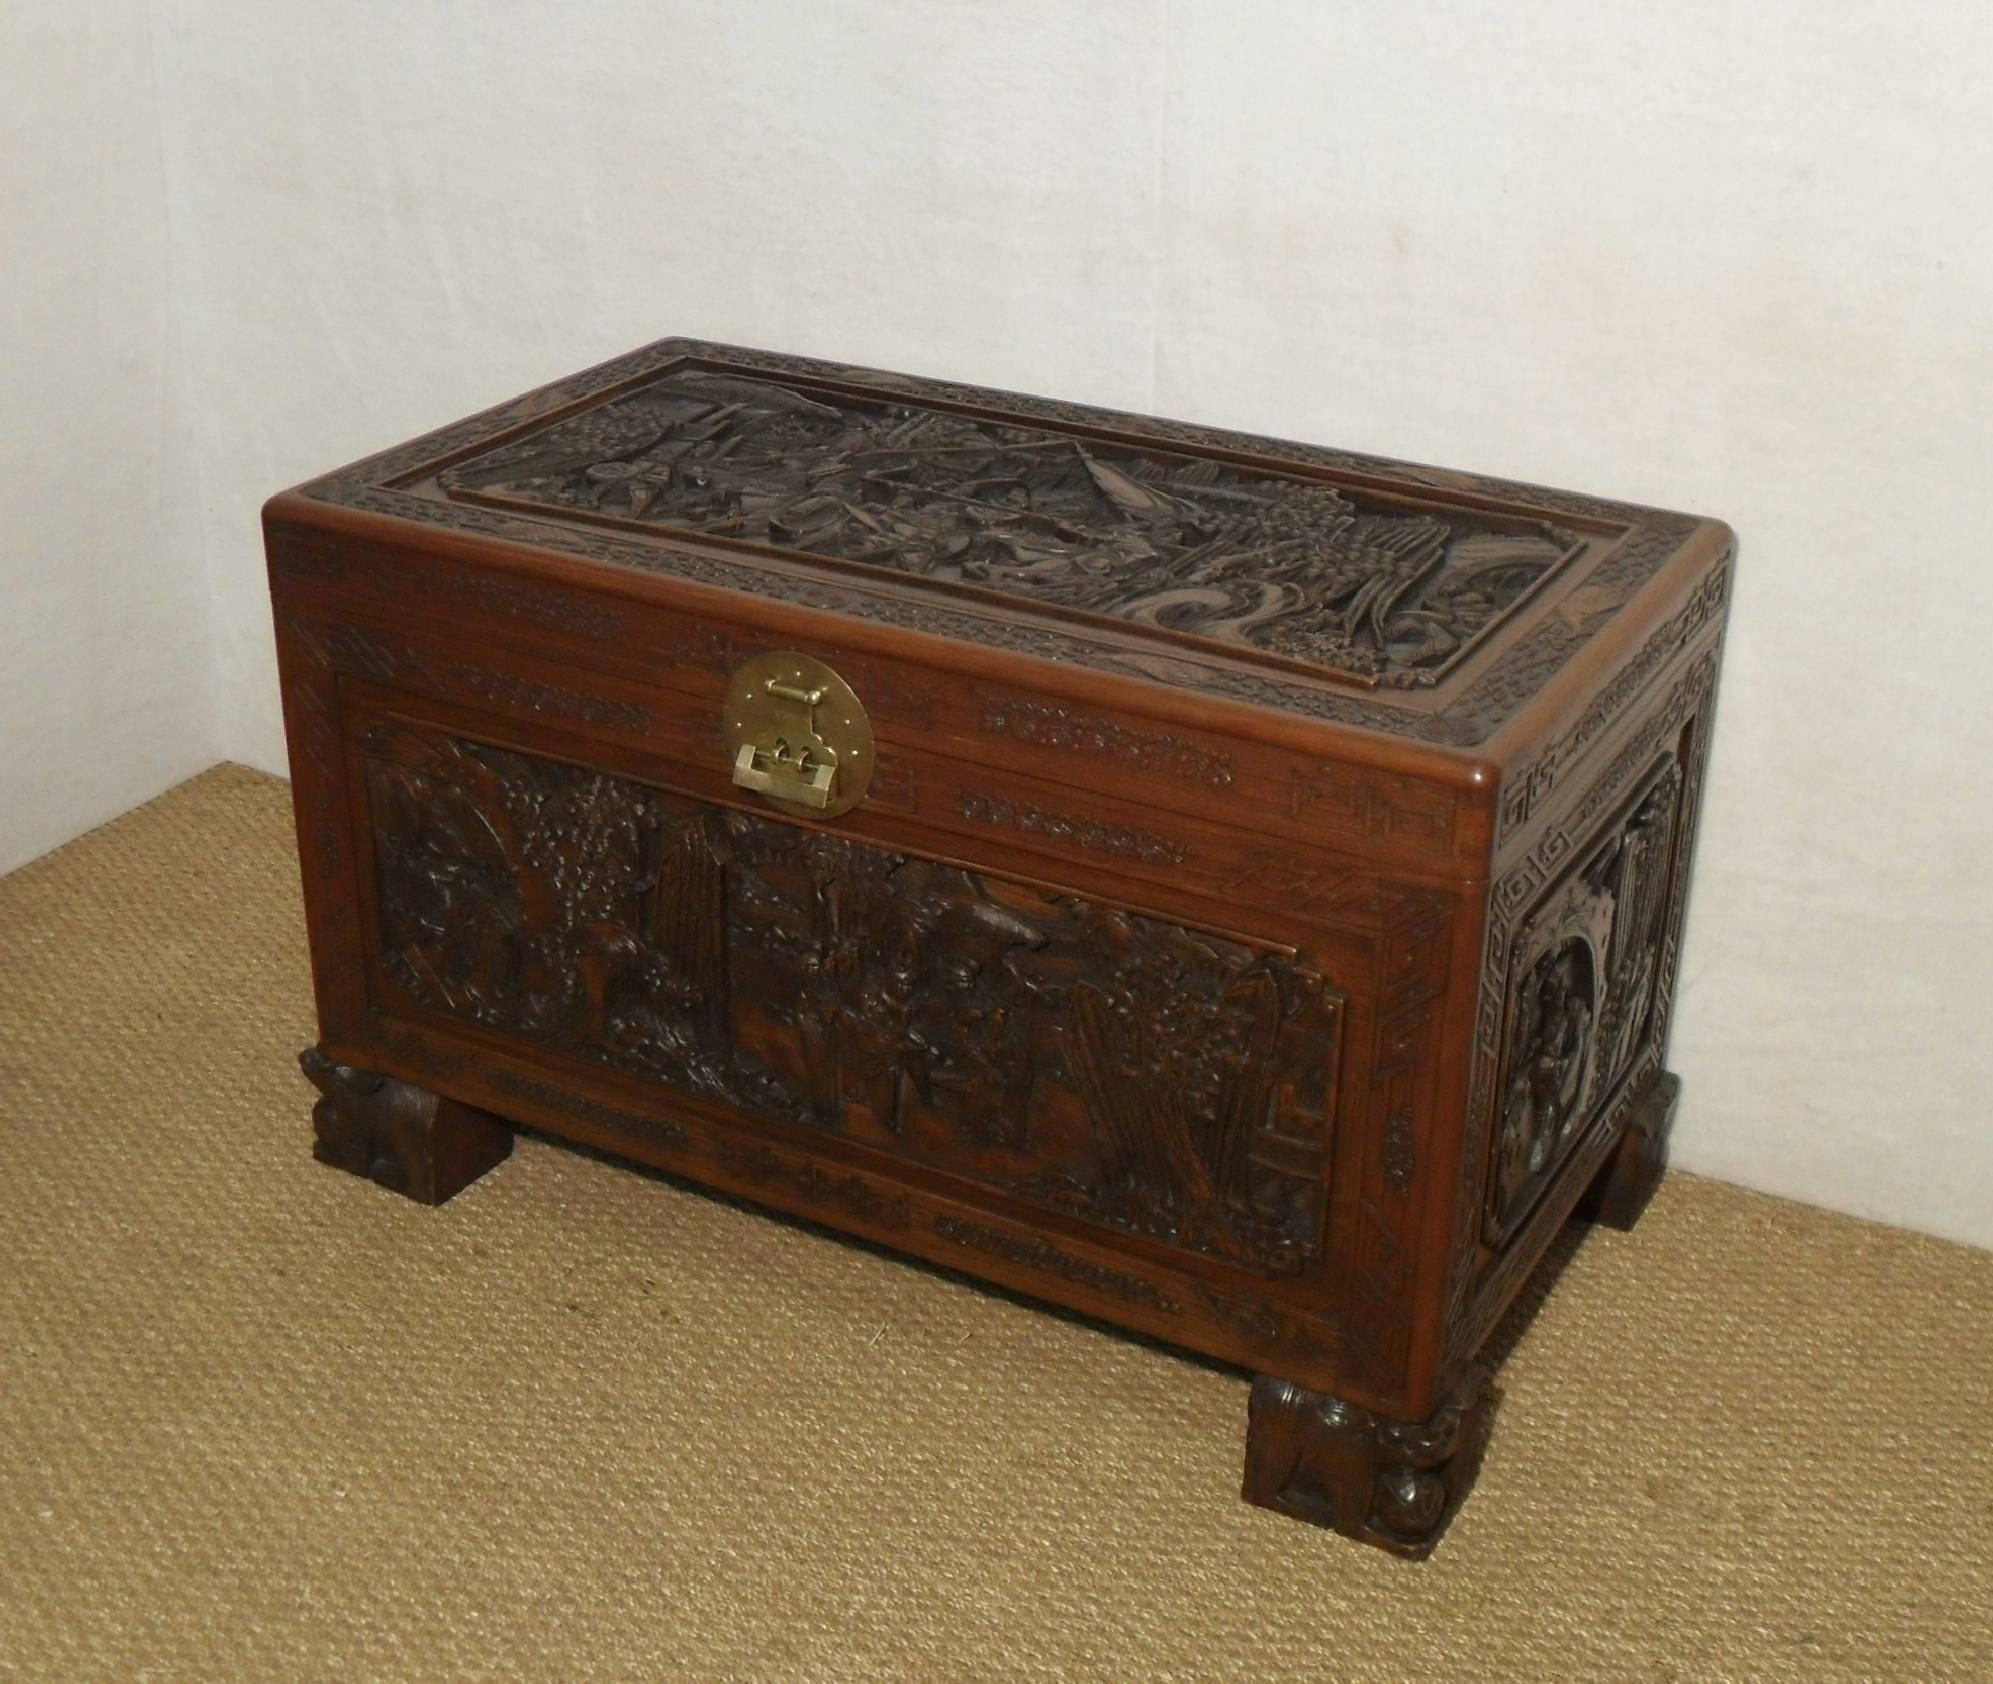 An extremely good quality and ornately carved freestanding oriental camphor wood chest with deeply carved scenes of warriors, horses, trees and pagodas surrounded with a floral, cloud and crane border. The chest retains its original engraved brass